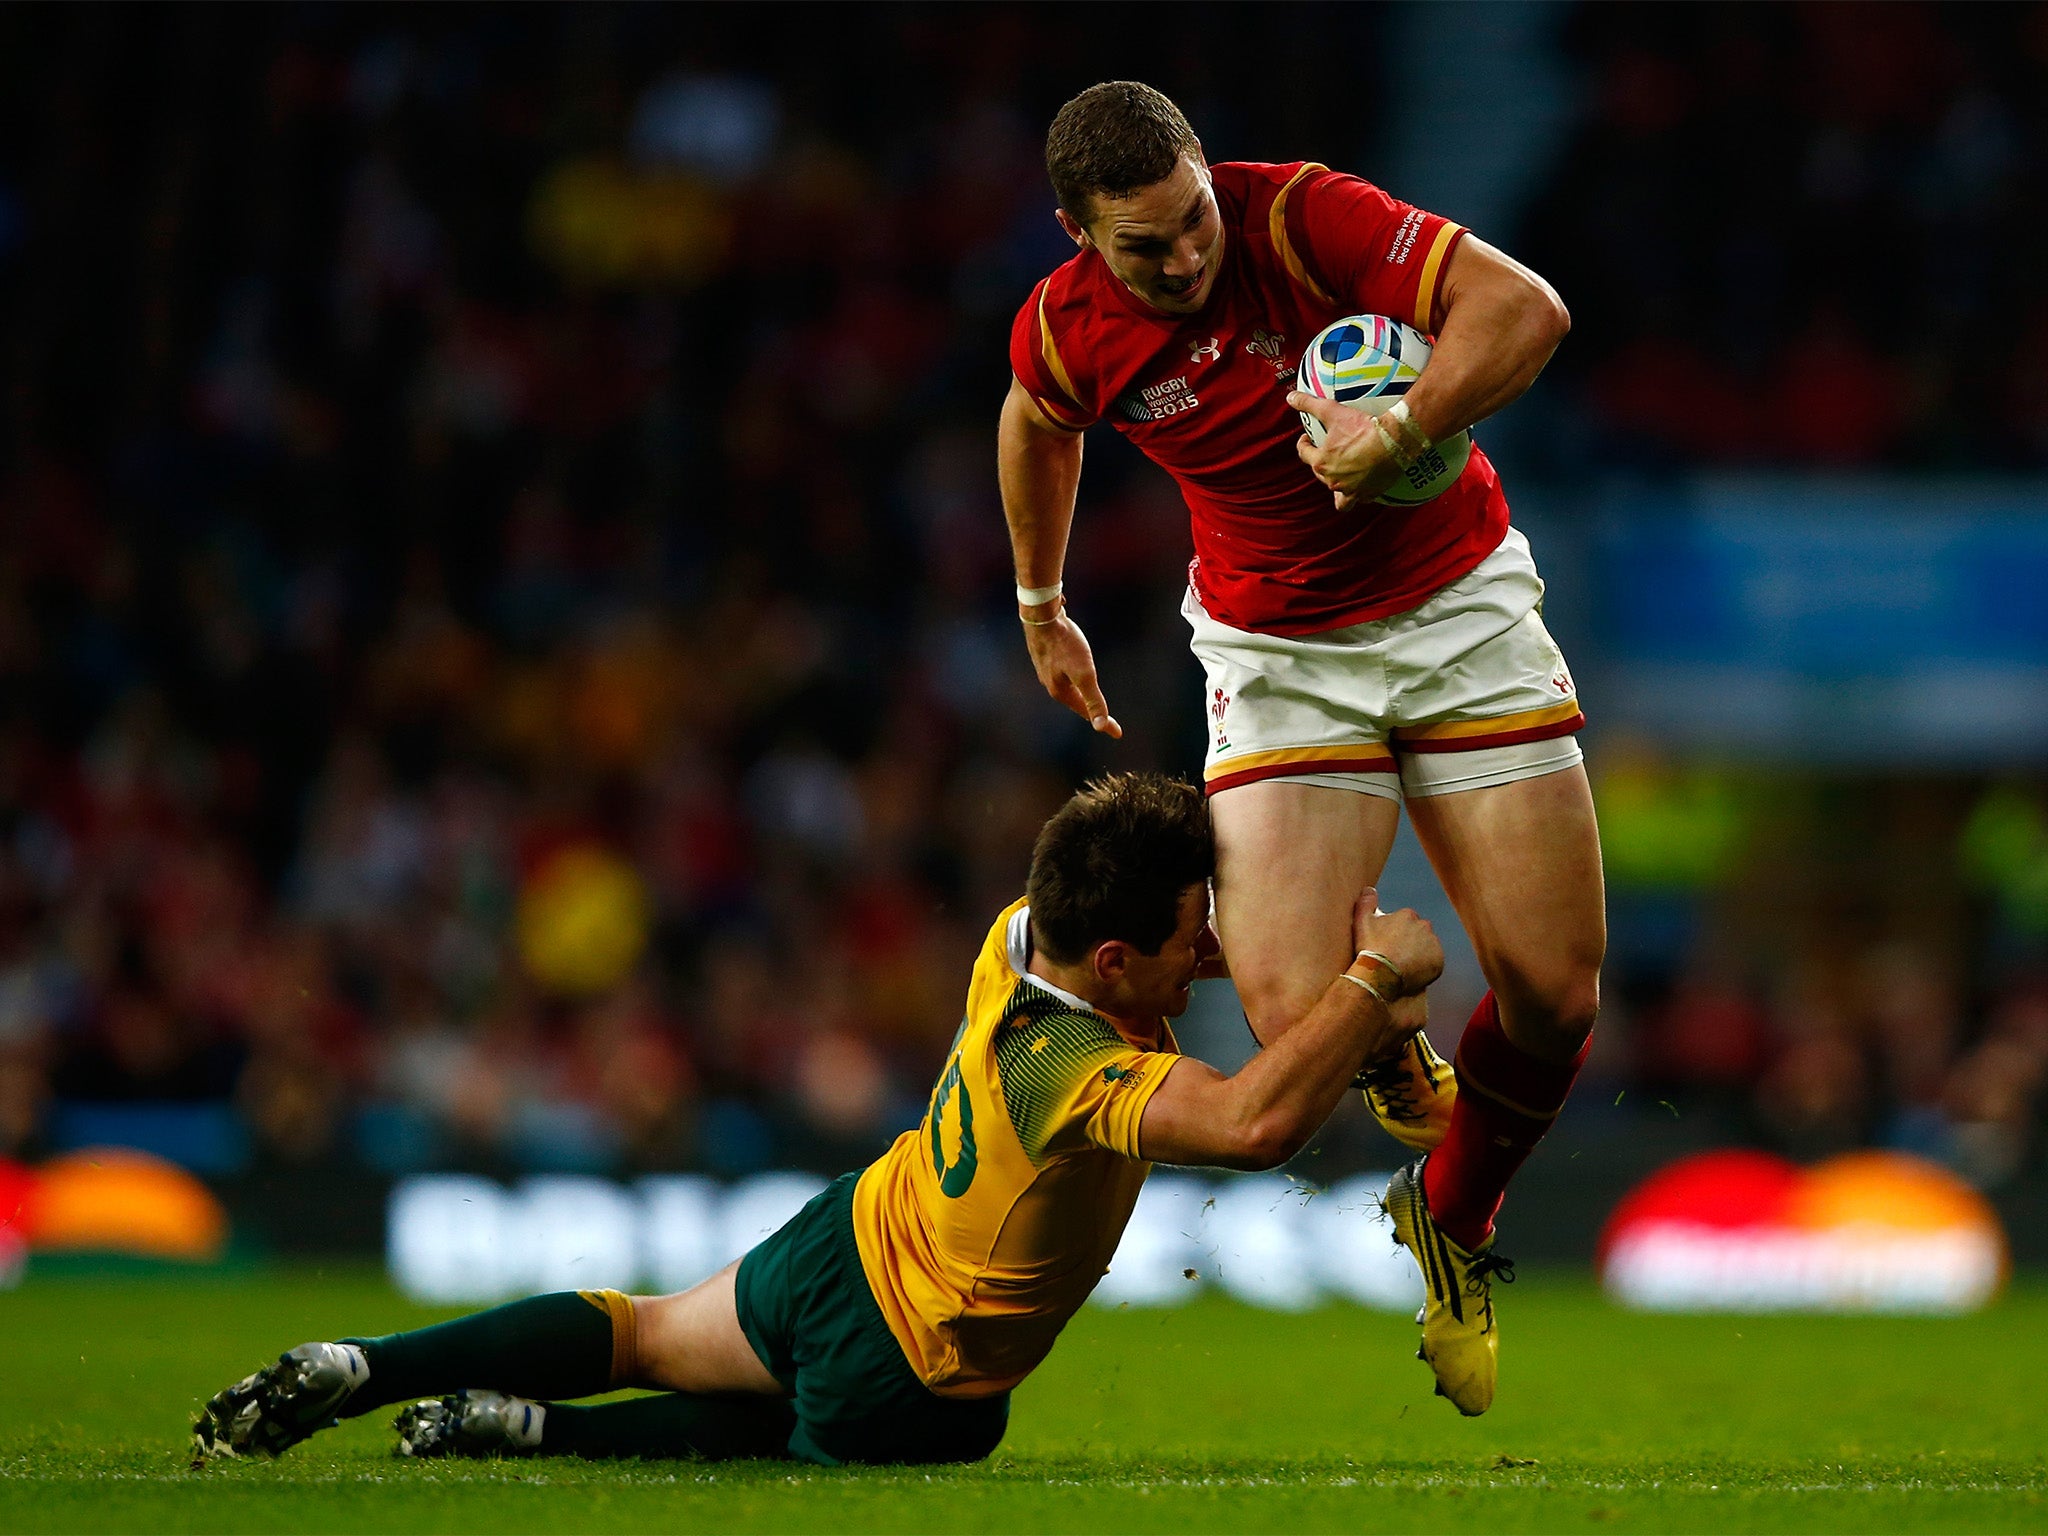 George North of Wales is tackled by Bernard Foley of Australia during the 2015 Rugby World Cup Pool A match between Australia and Wales at Twickenham Stadium on